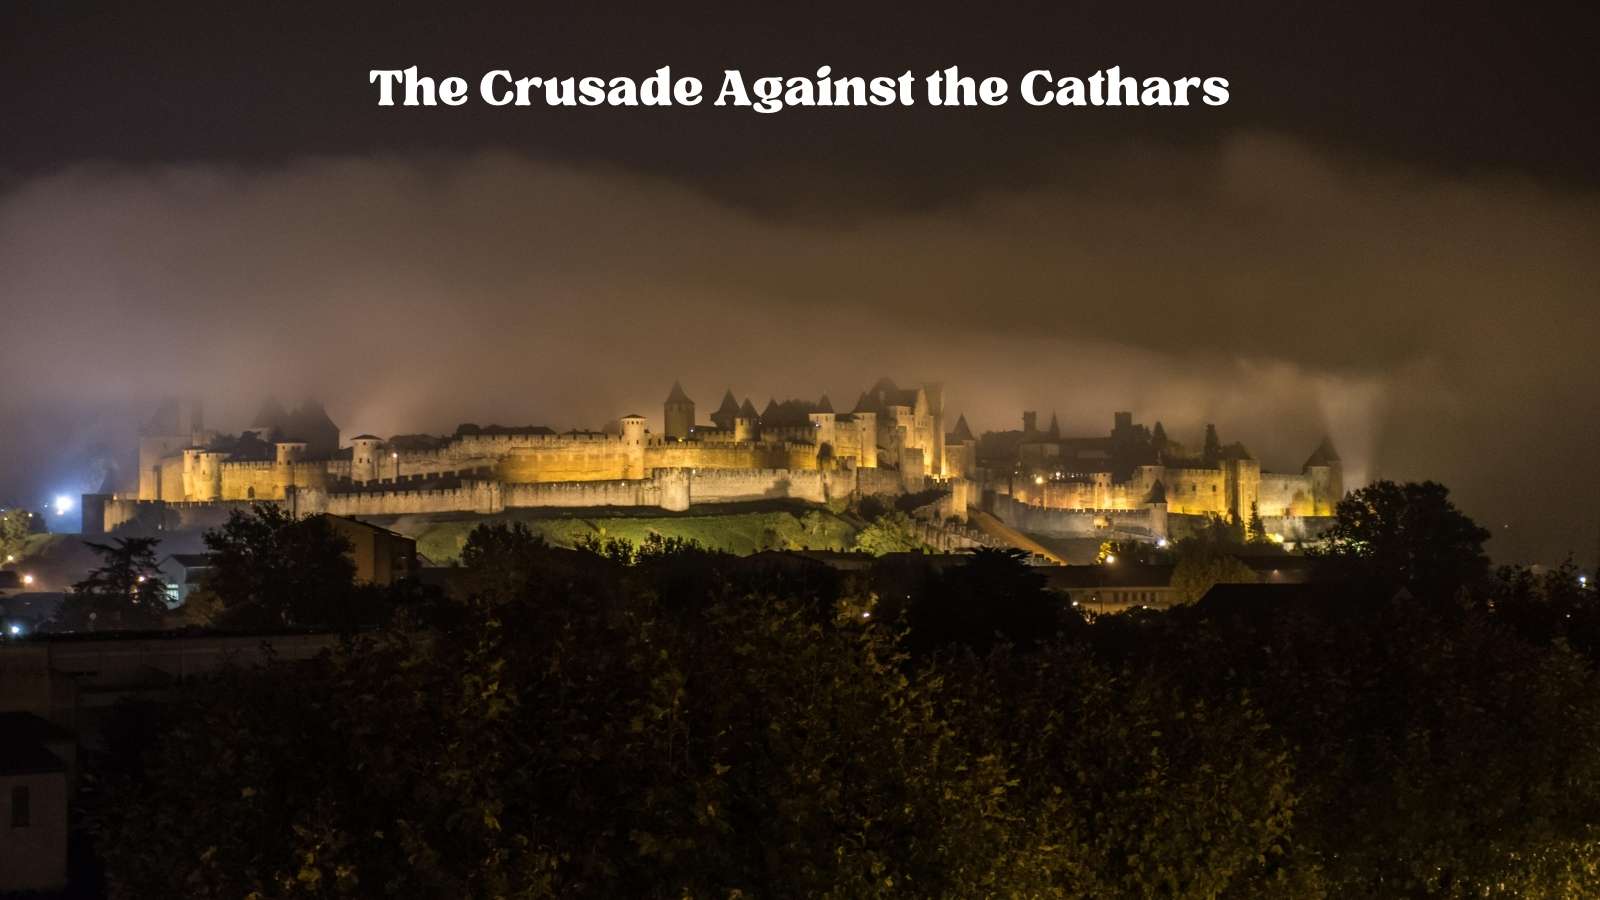 The walled city of Carcassonne: crusade against the Cathars episode